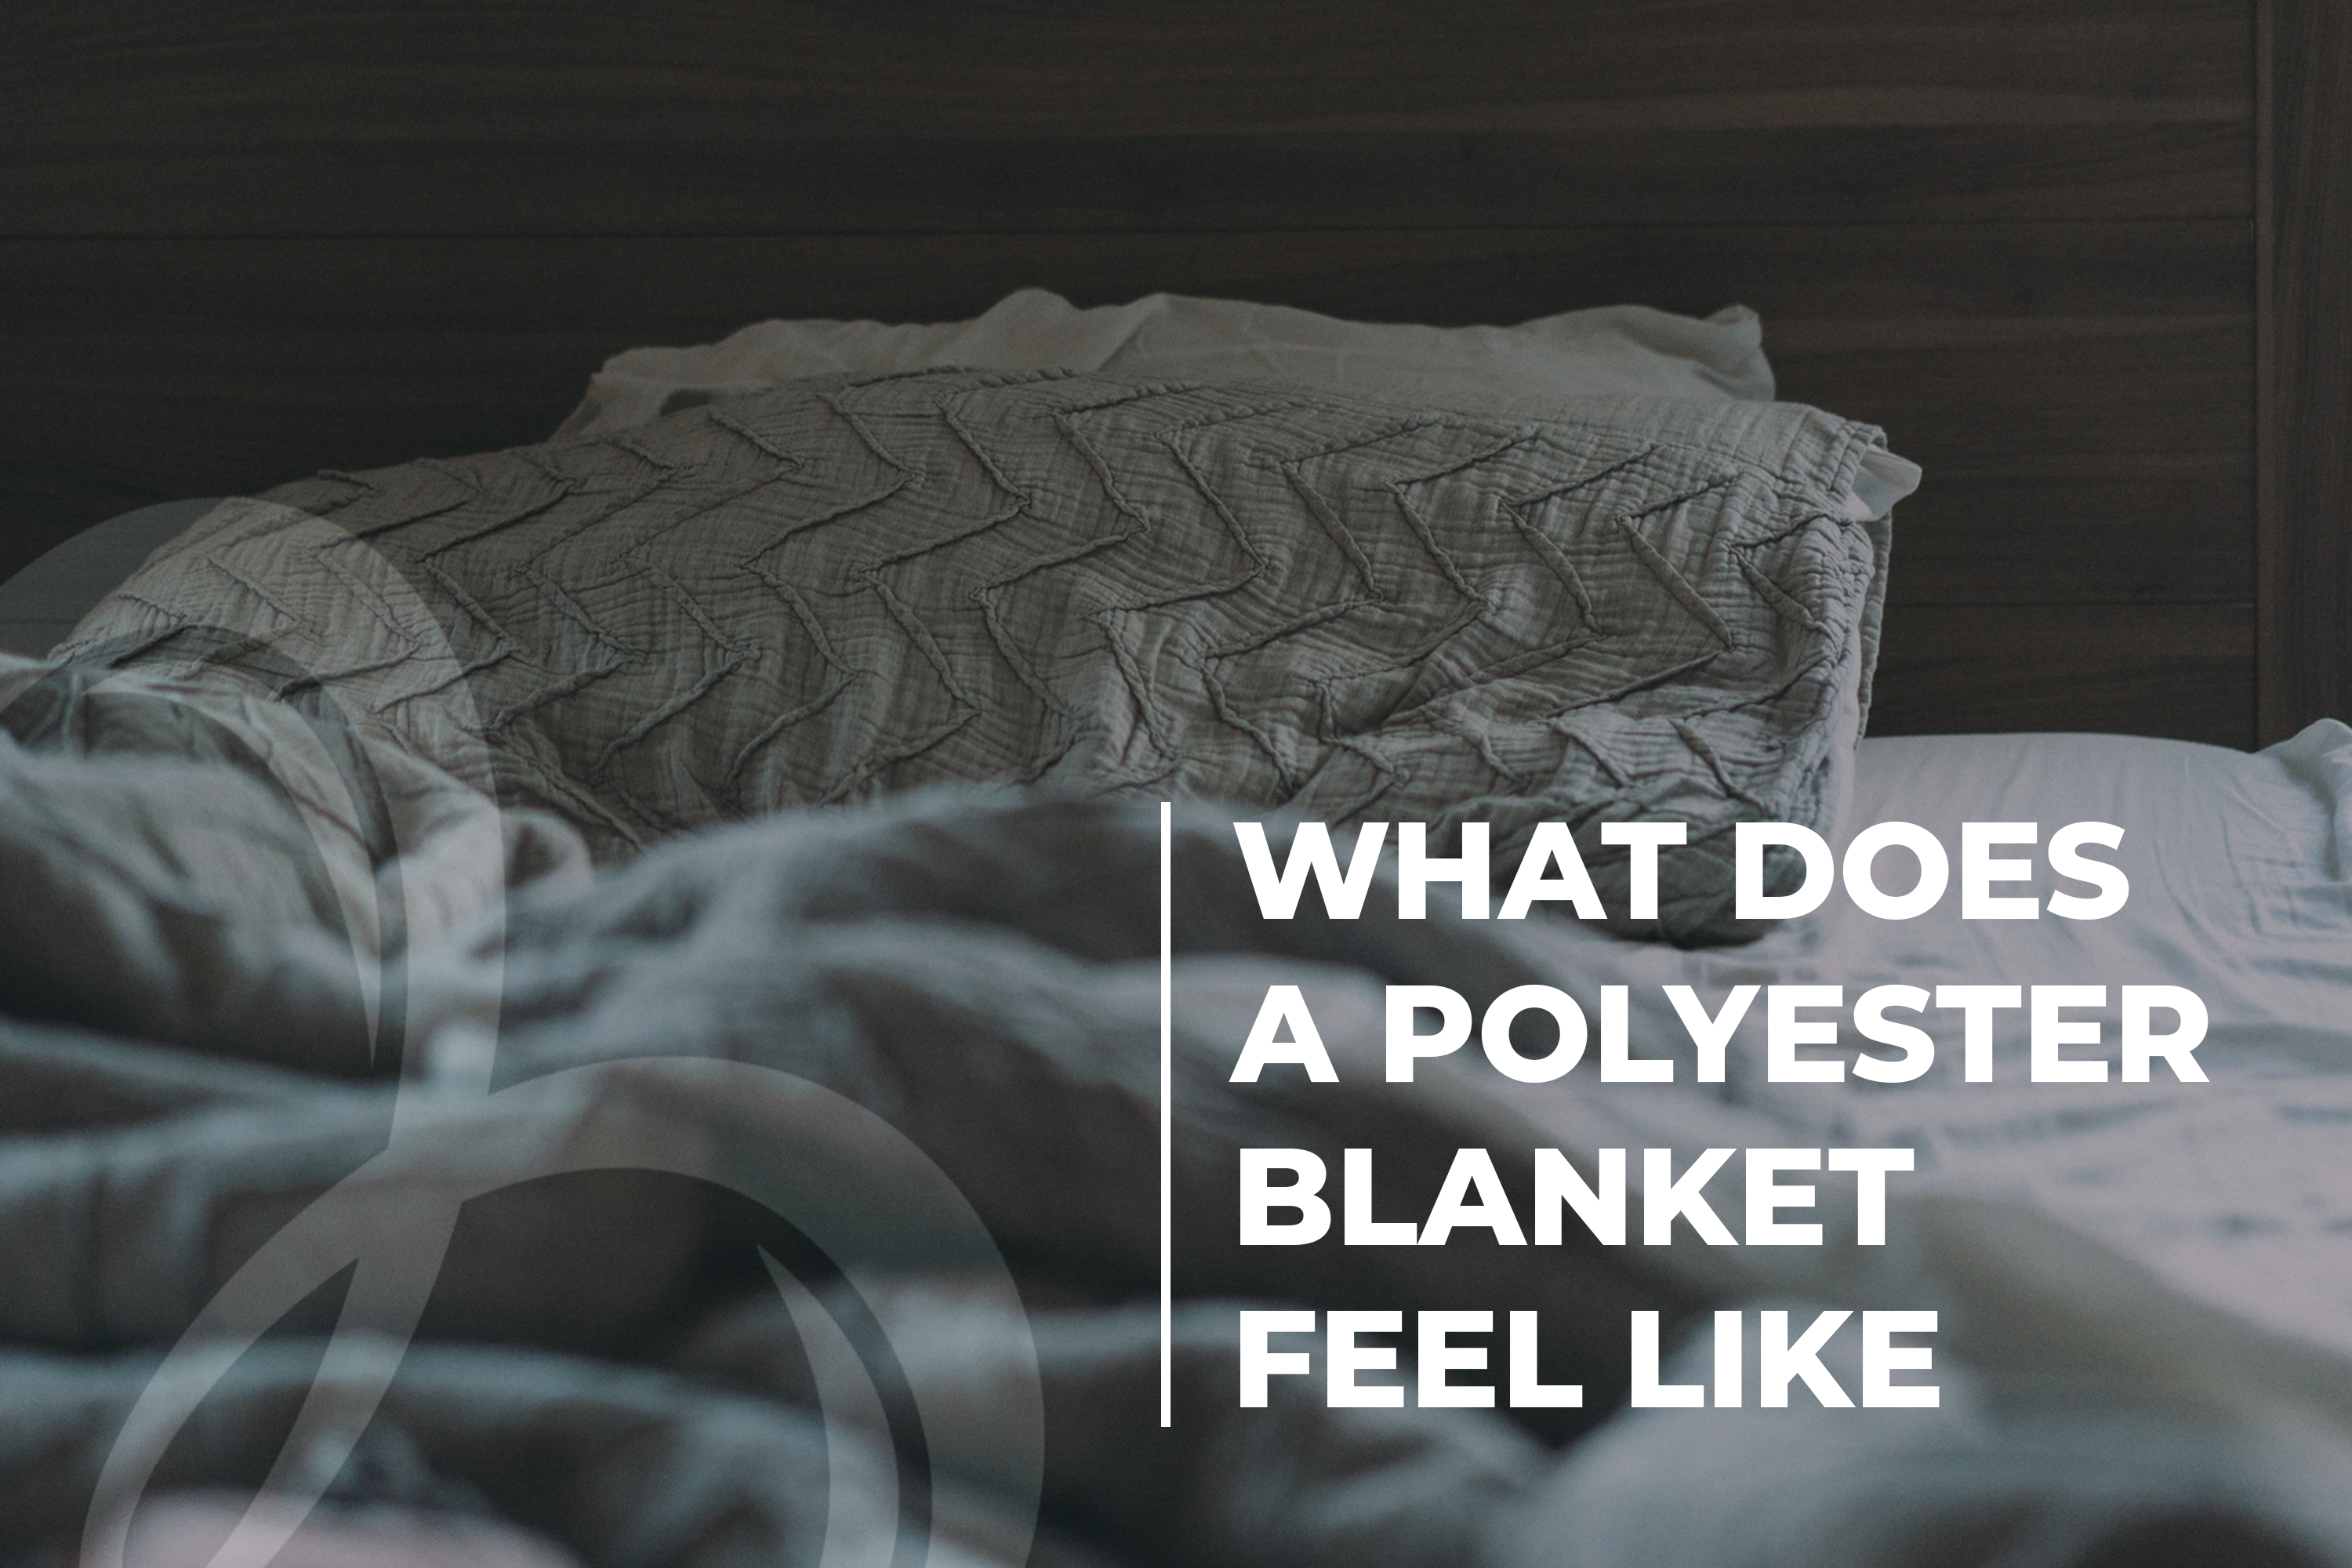 What Does a Polyester Blanket Feel Like